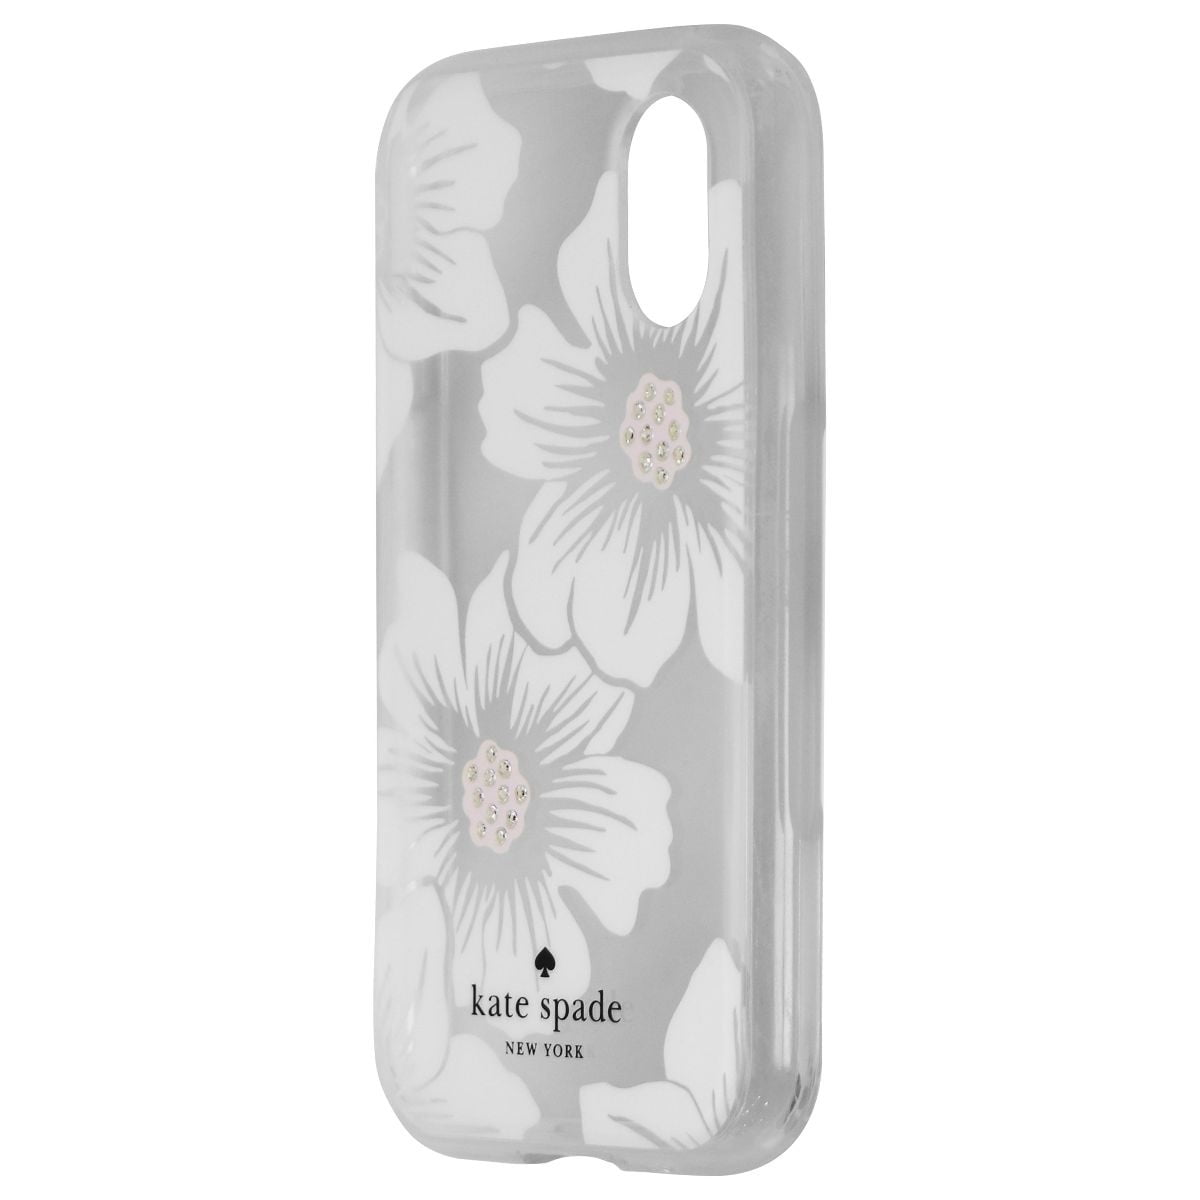 Kate Spade Hardshell Case for Palm Companion - Clear/Hollyhock Floral/Gems  